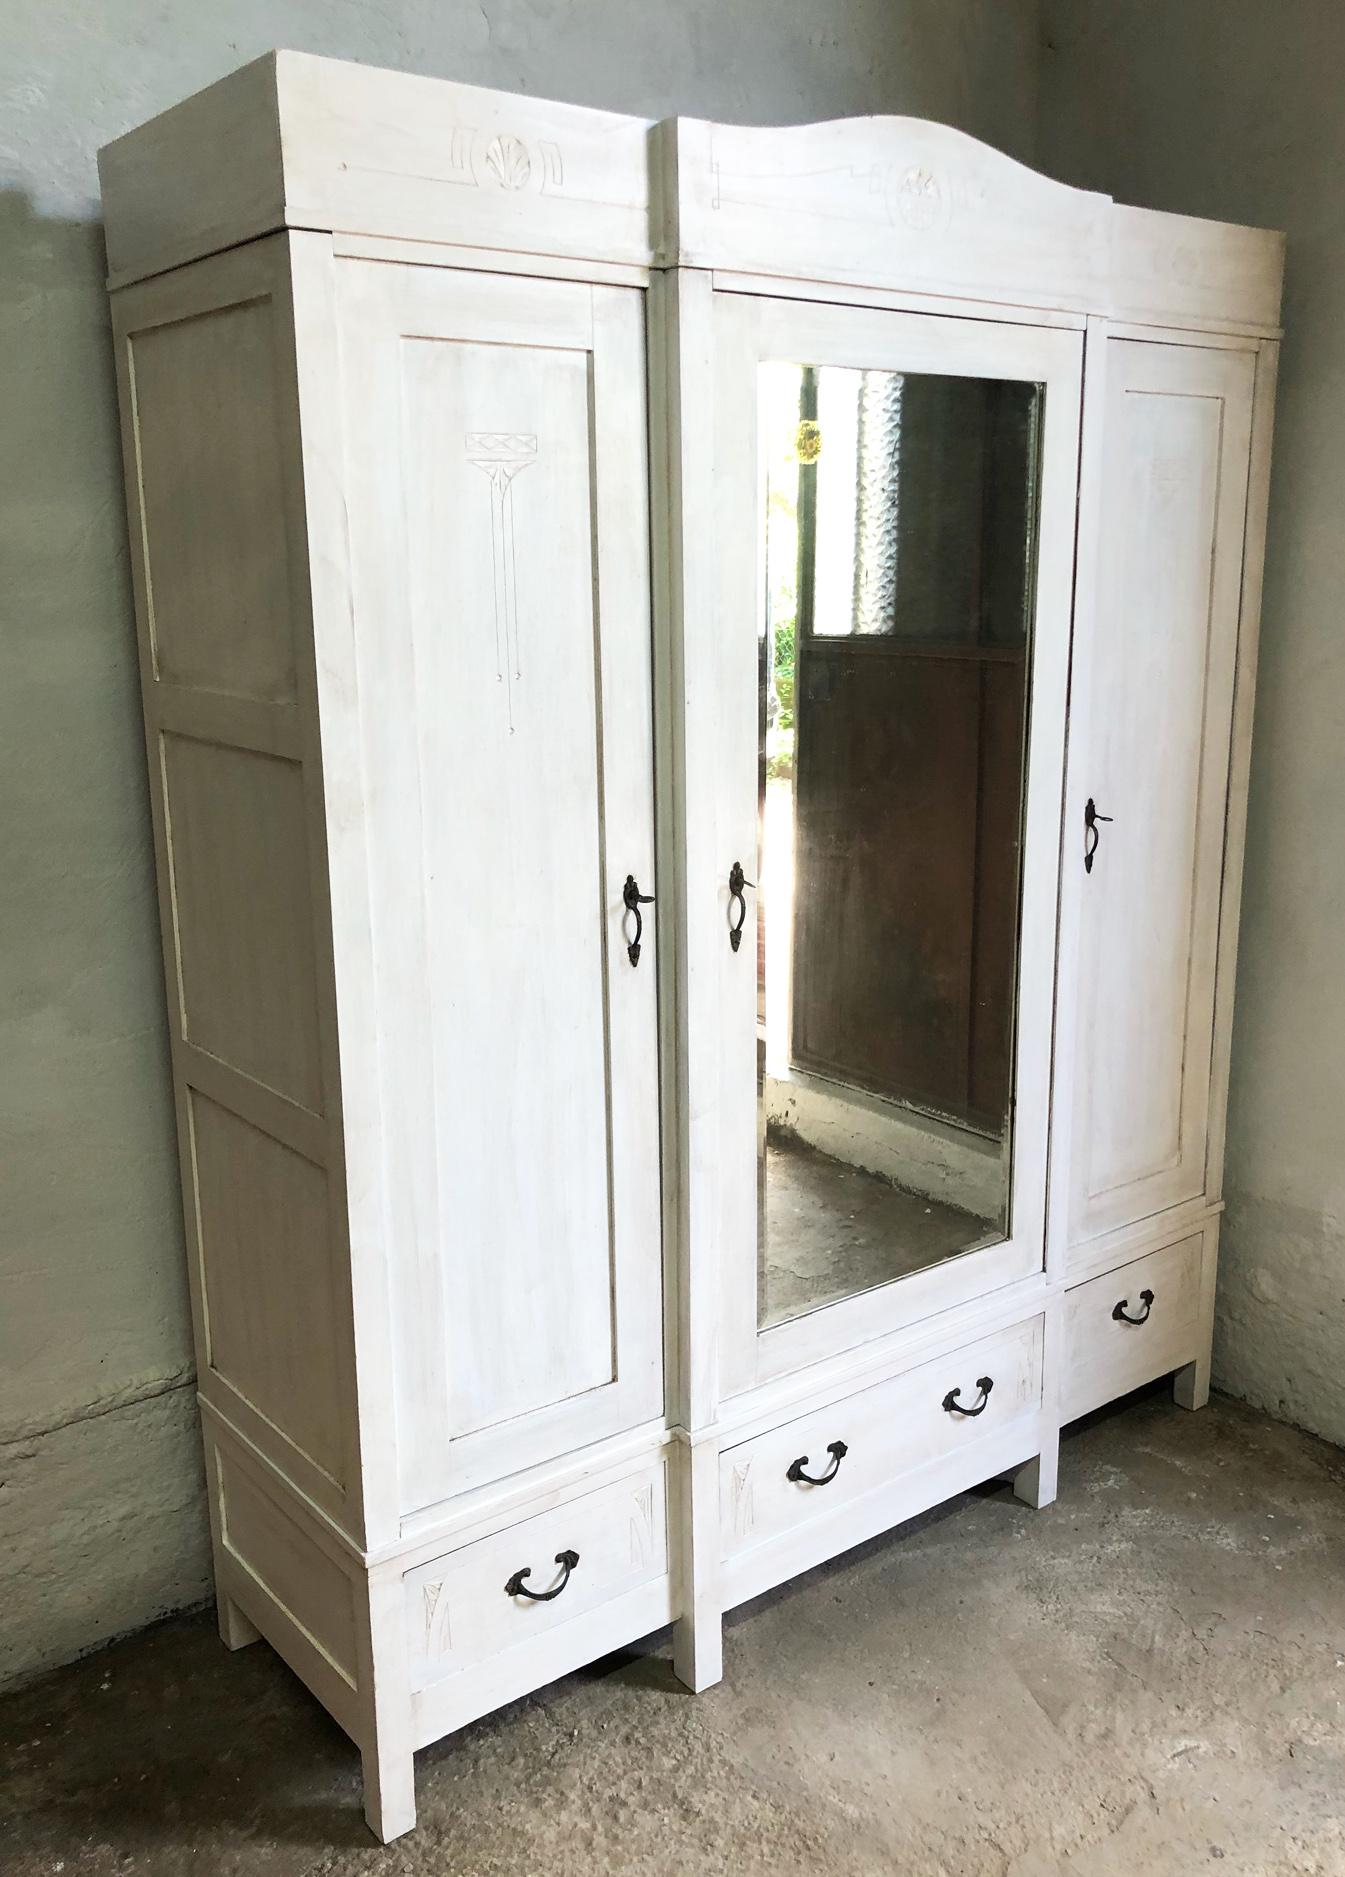 Italian wardrobe about from 1930, original, with three doors, patinated shabby white color.
The central door has the mirror on the outside.
 It can be completely disassembled and can be easily reassembled in 15 minutes.
The wardrobe has been